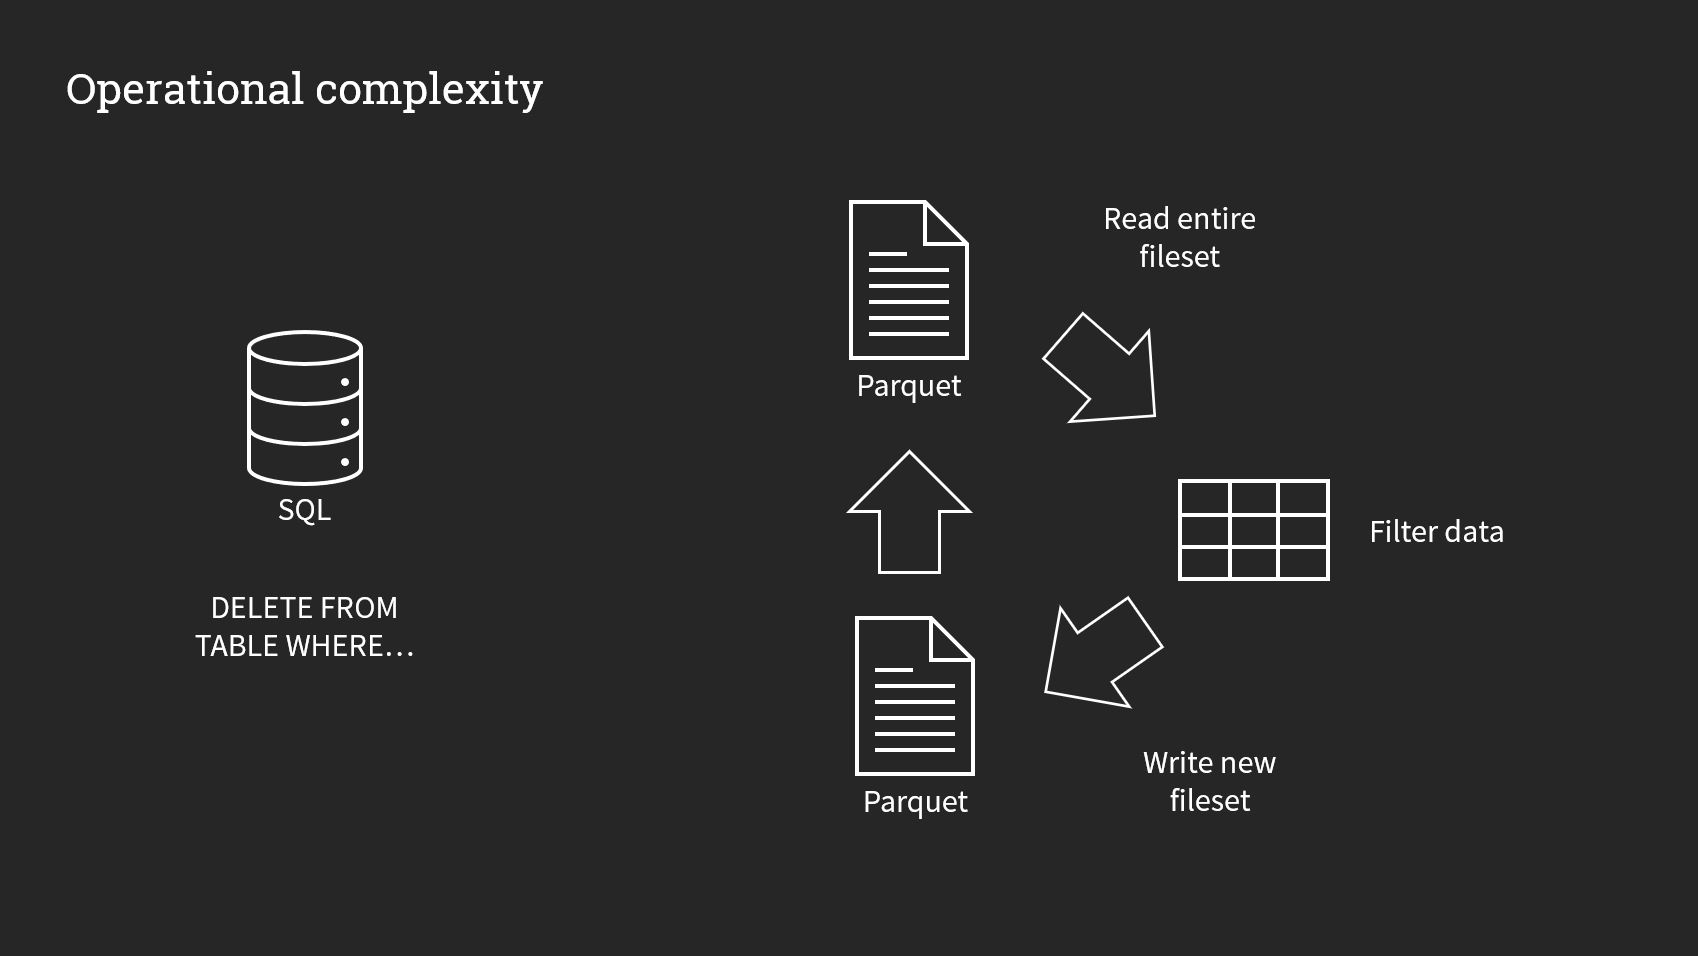 Operational complexity